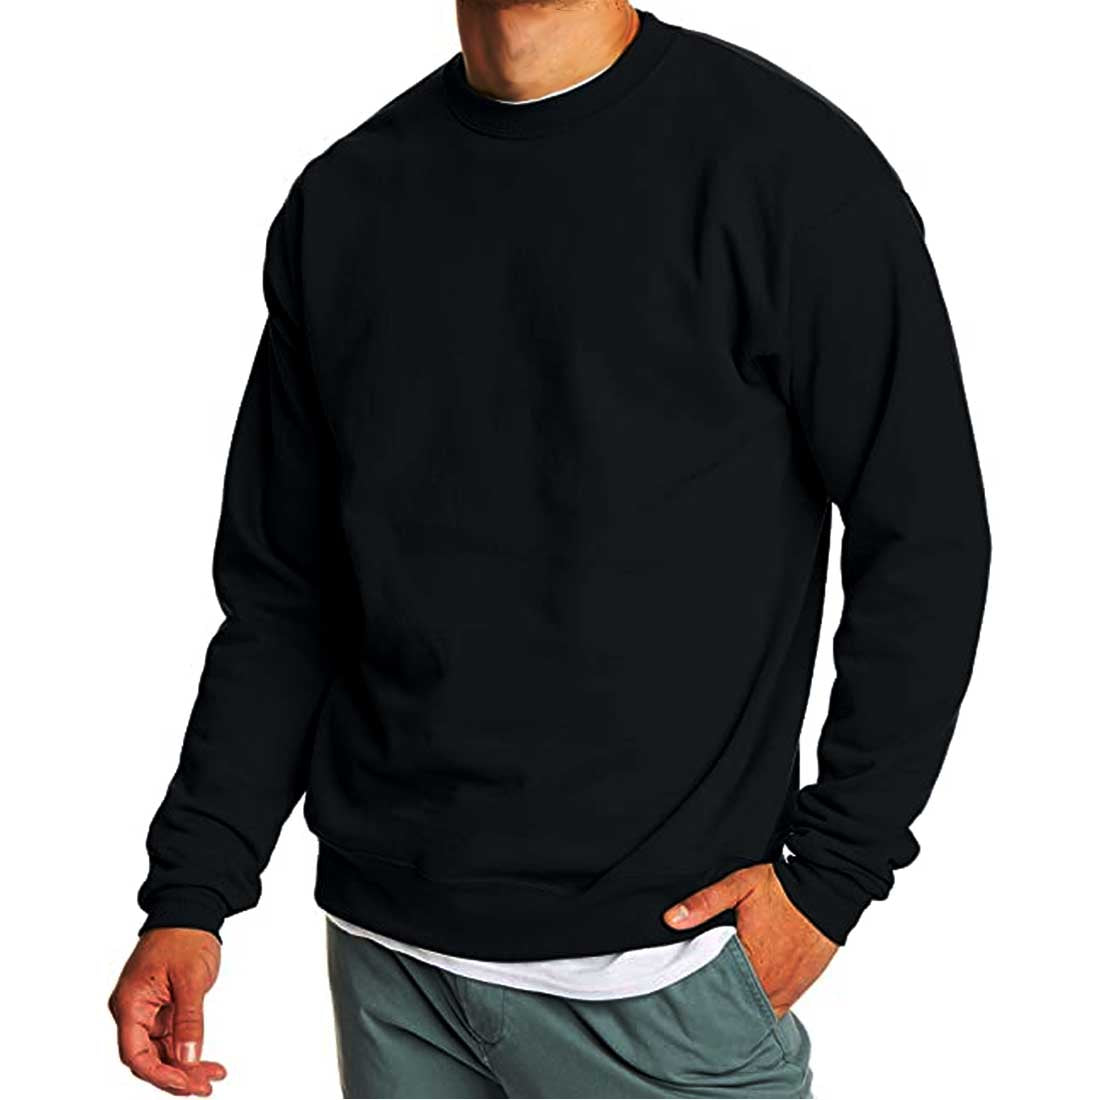 Personalized Sweatshirt for Mens Round Neck - Name & Number